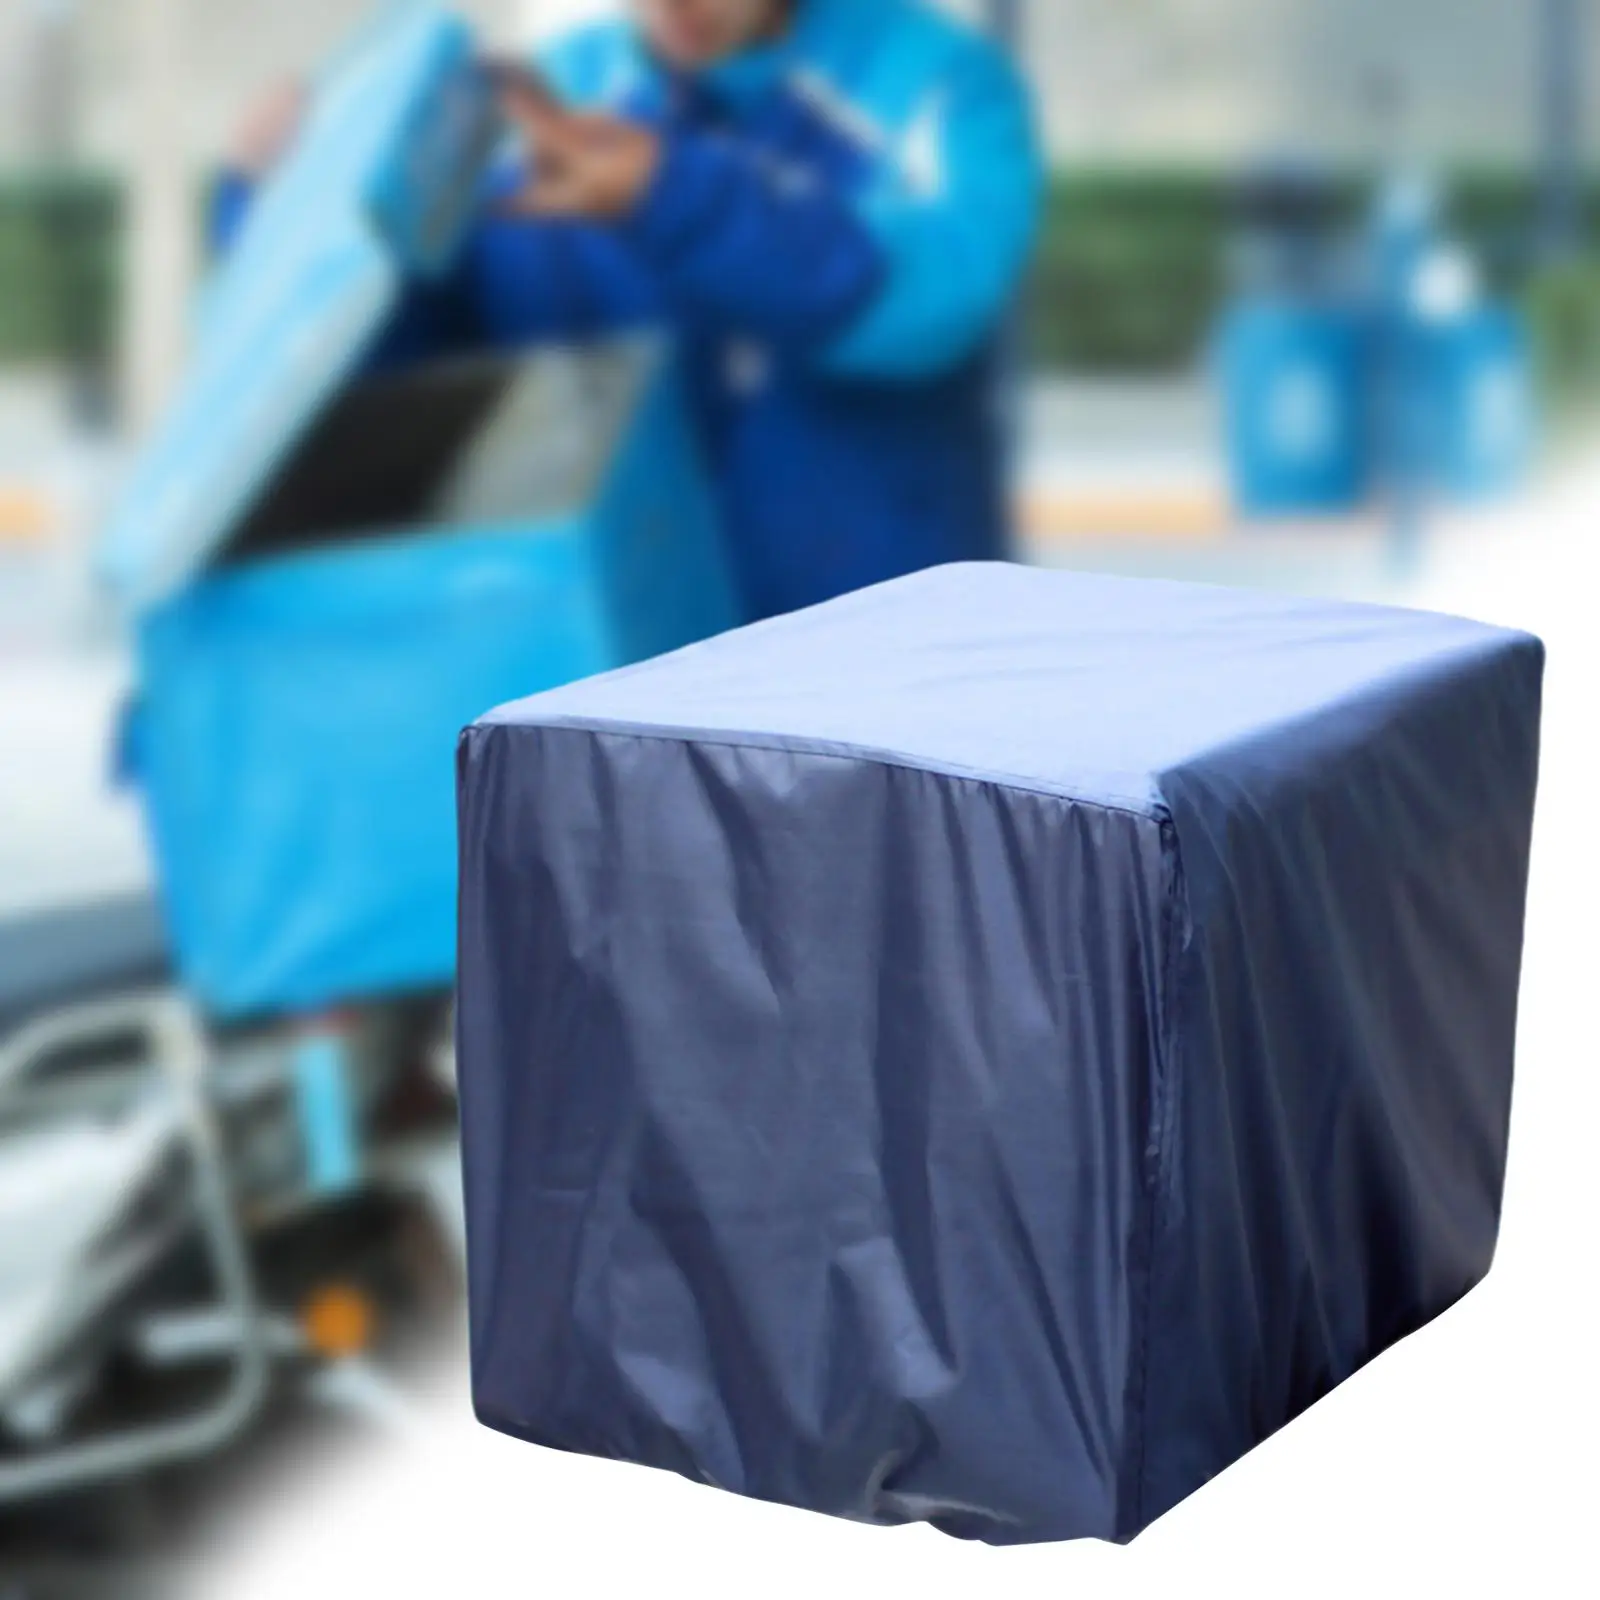 Delivery Box Rain Cover Protector Dustproof Equipment Delivery Bag Cover for Catering Outdoor Restaurant Delivery Driver